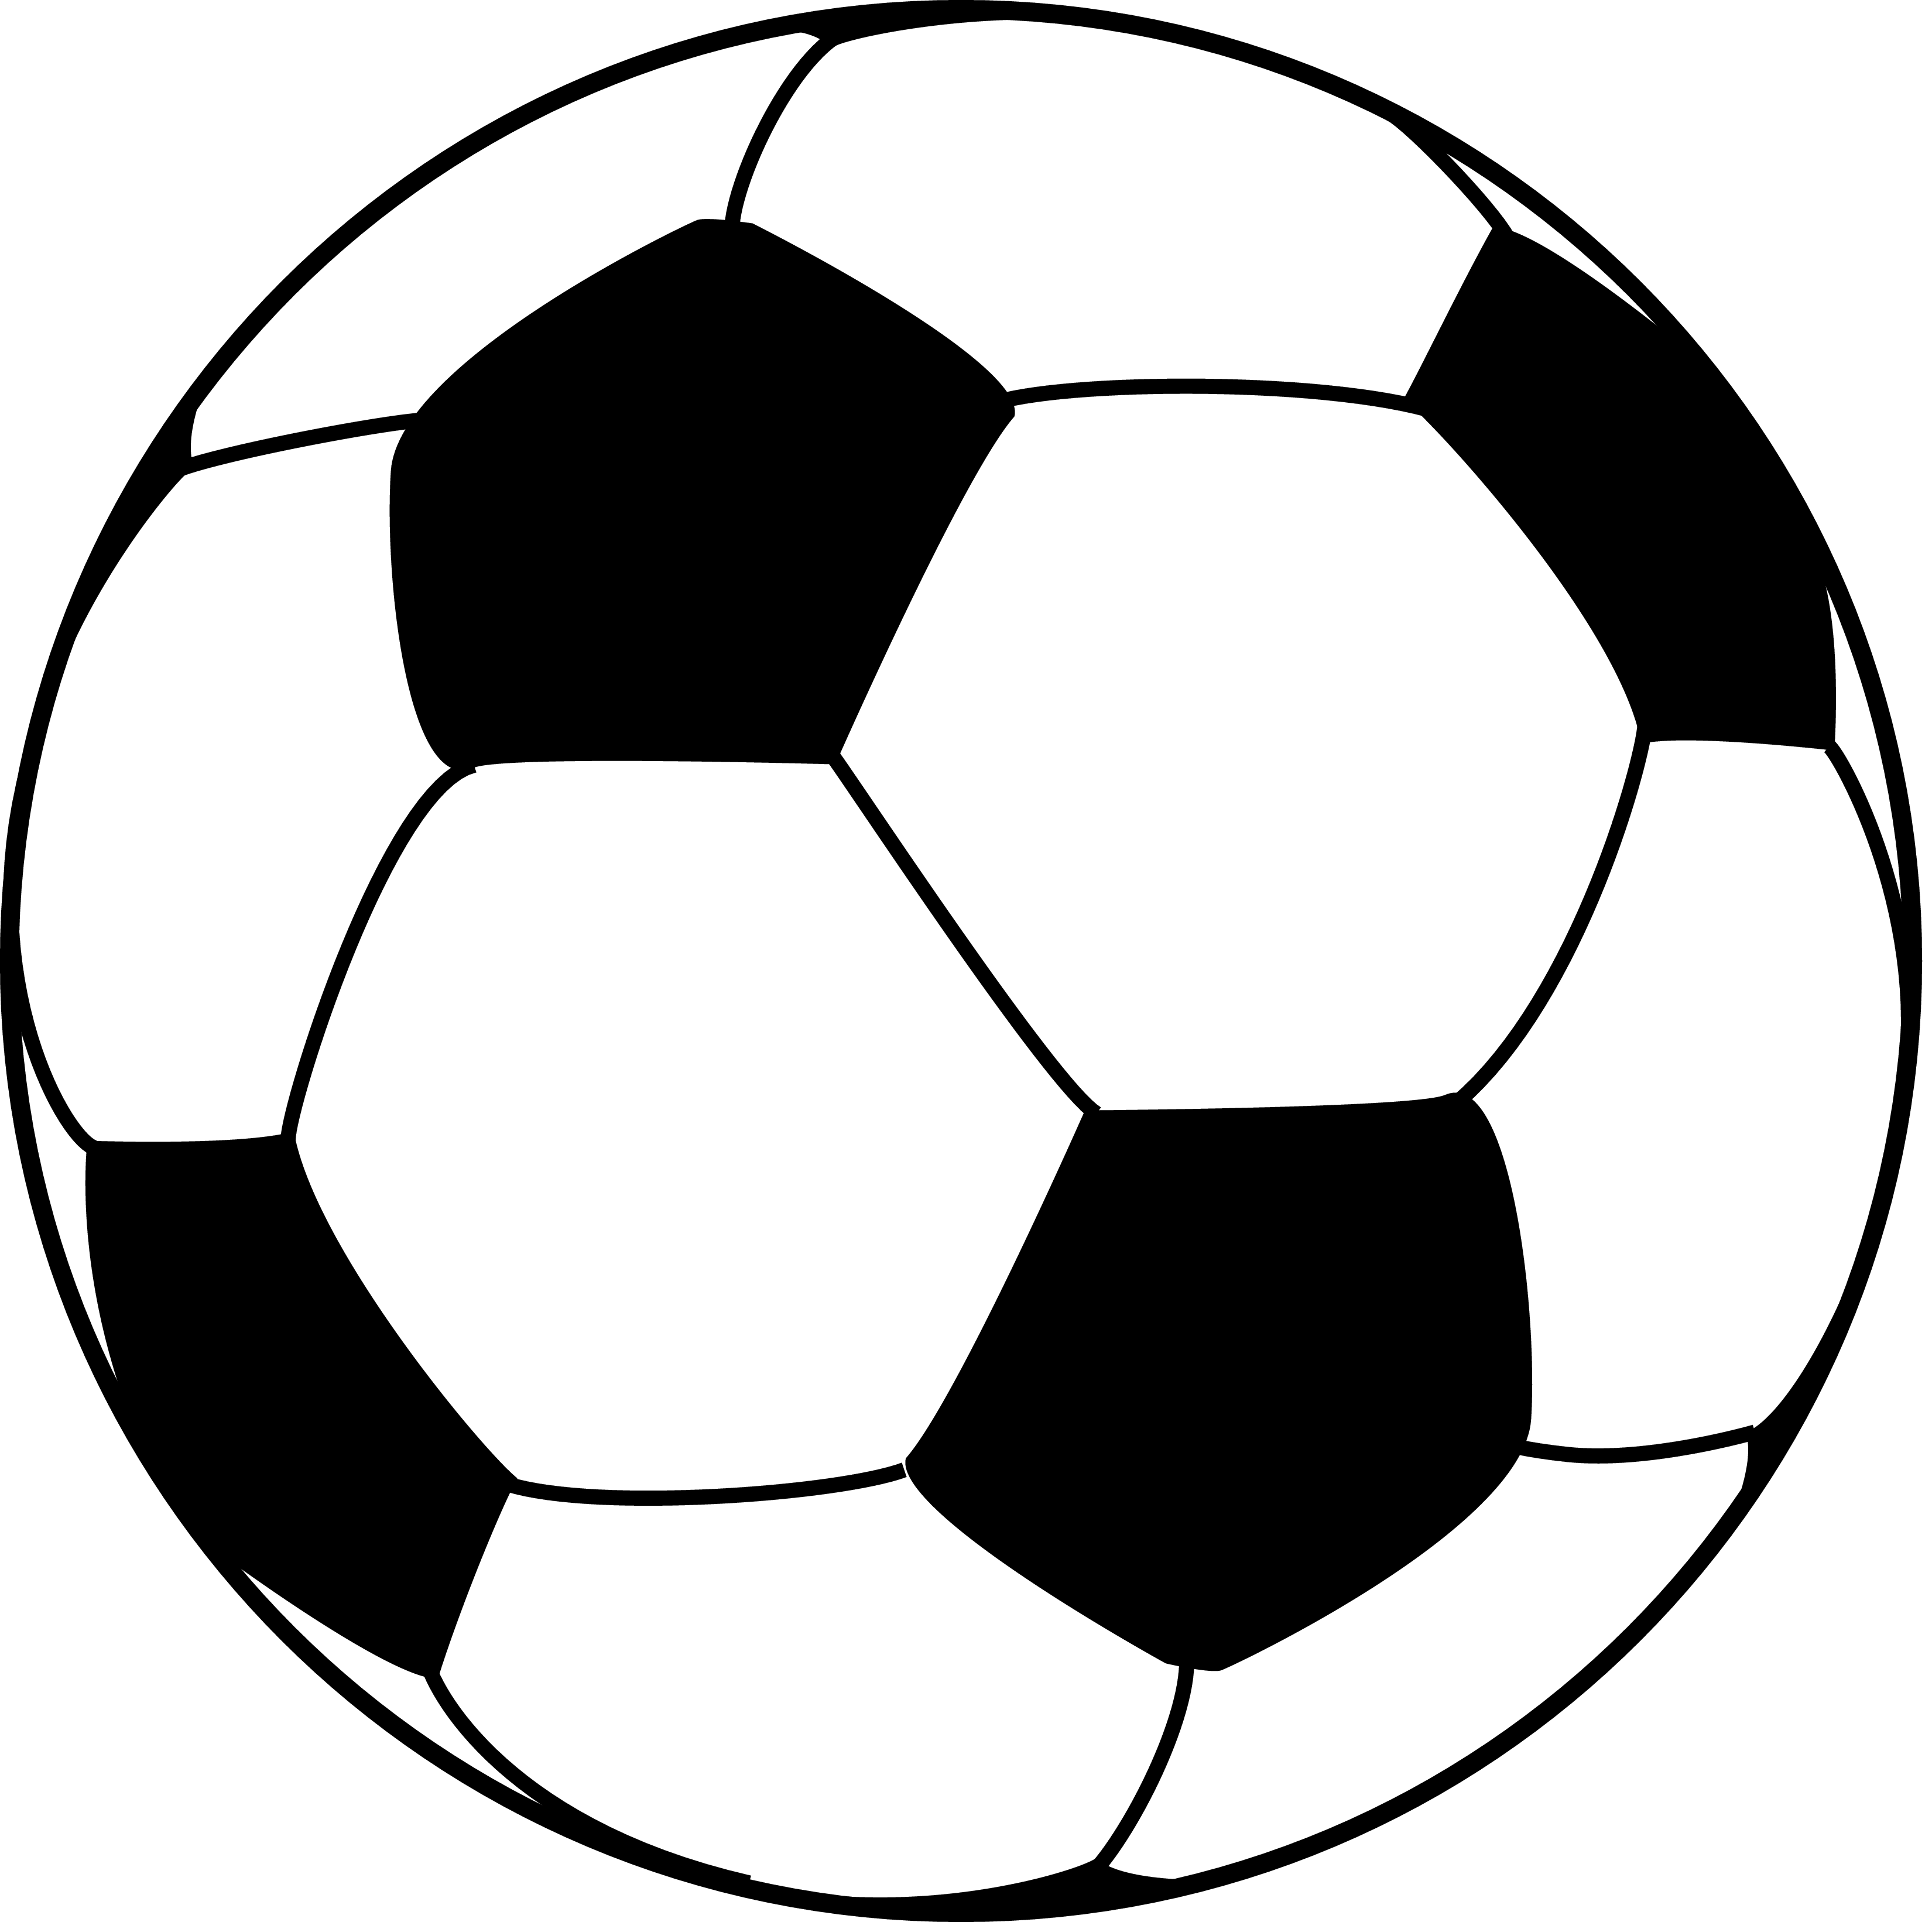 Clipart shield soccer. Ball drawing easy at